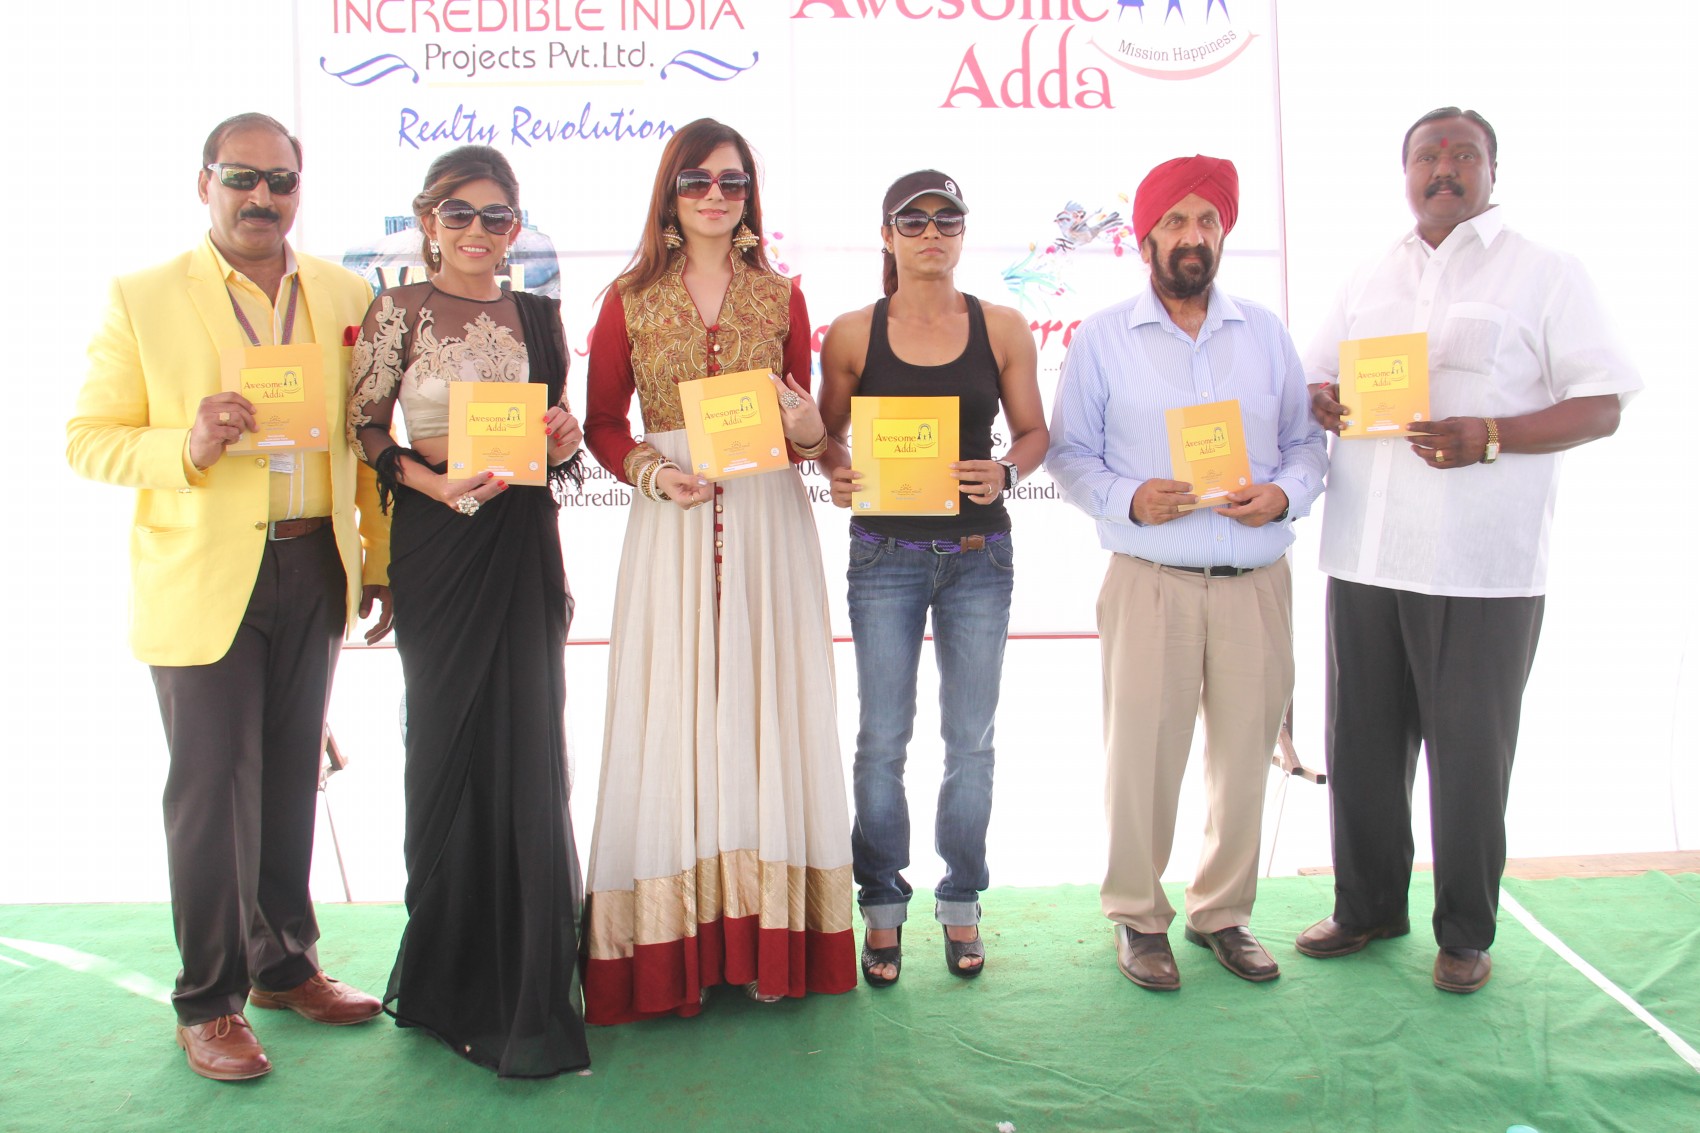 Incrediable India projects Launches Awesome Adda